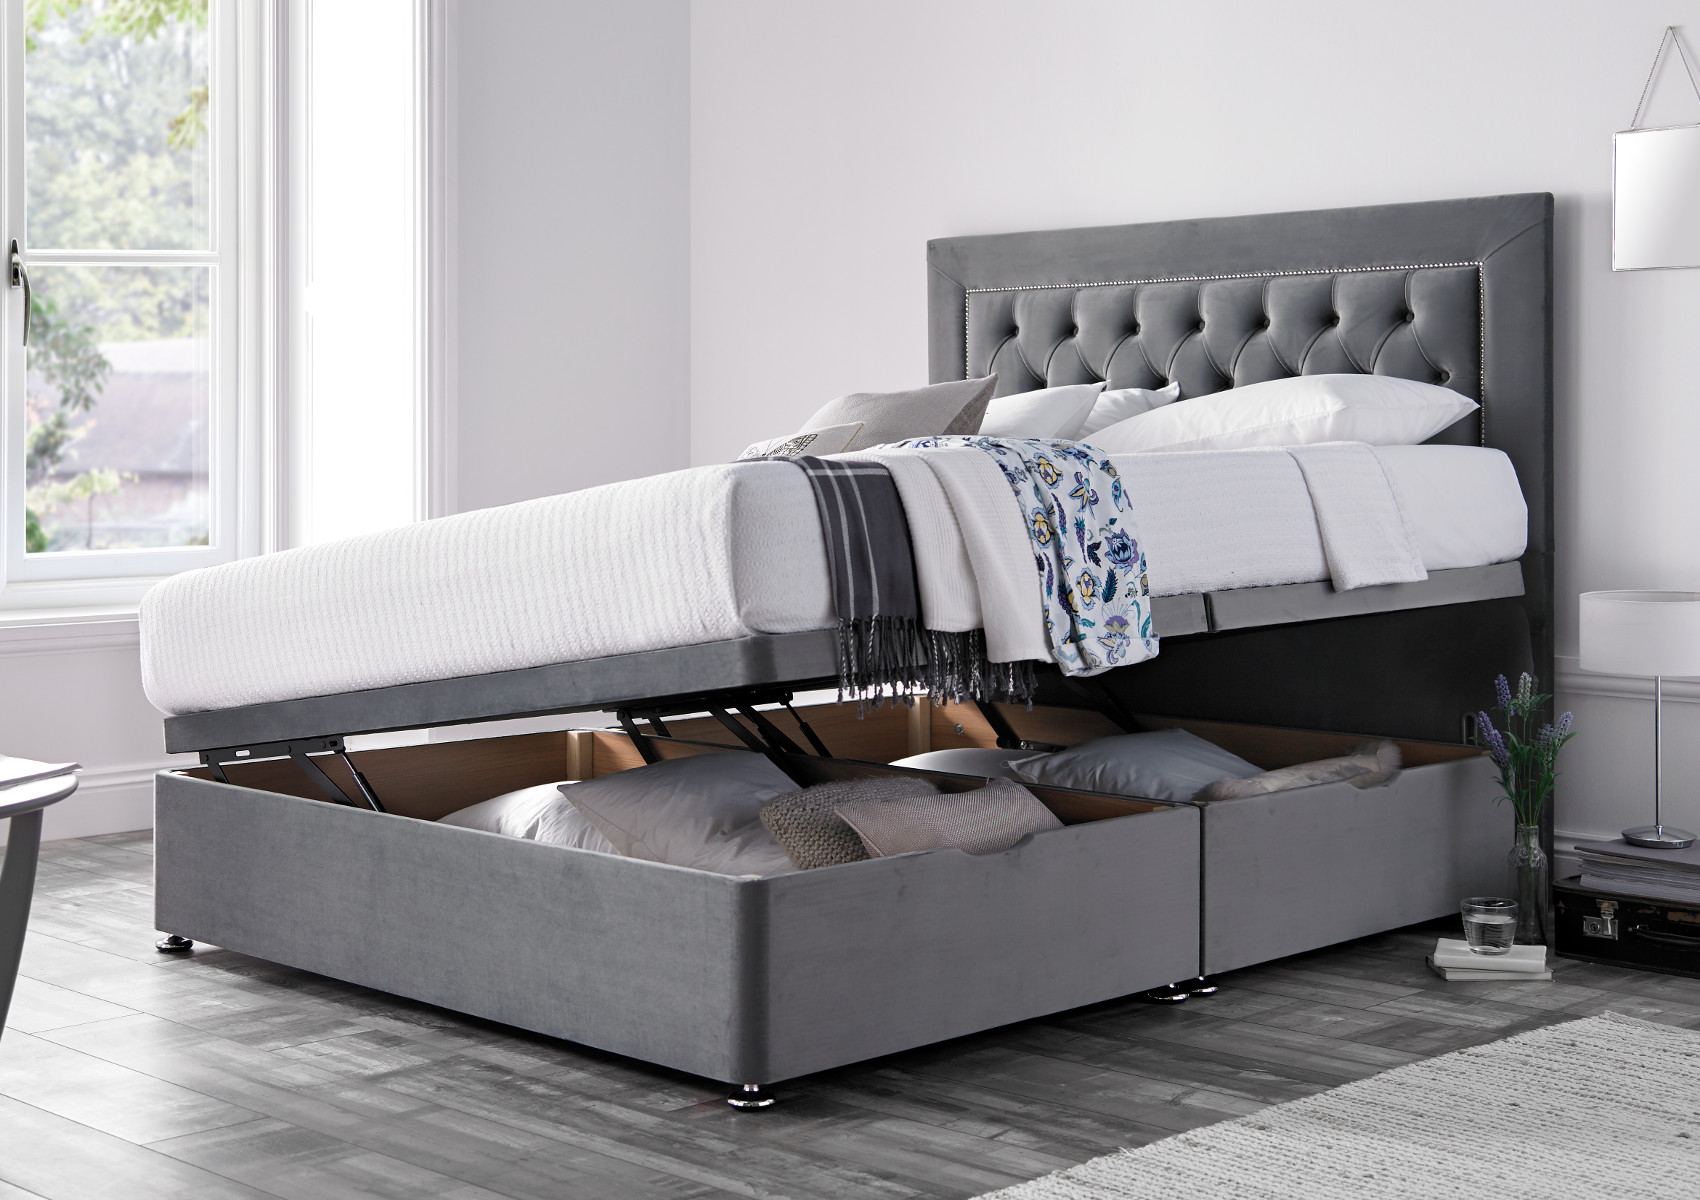 View Woodstock Silver Glitz Upholstered King Size Ottoman Bed Time4Sleep information